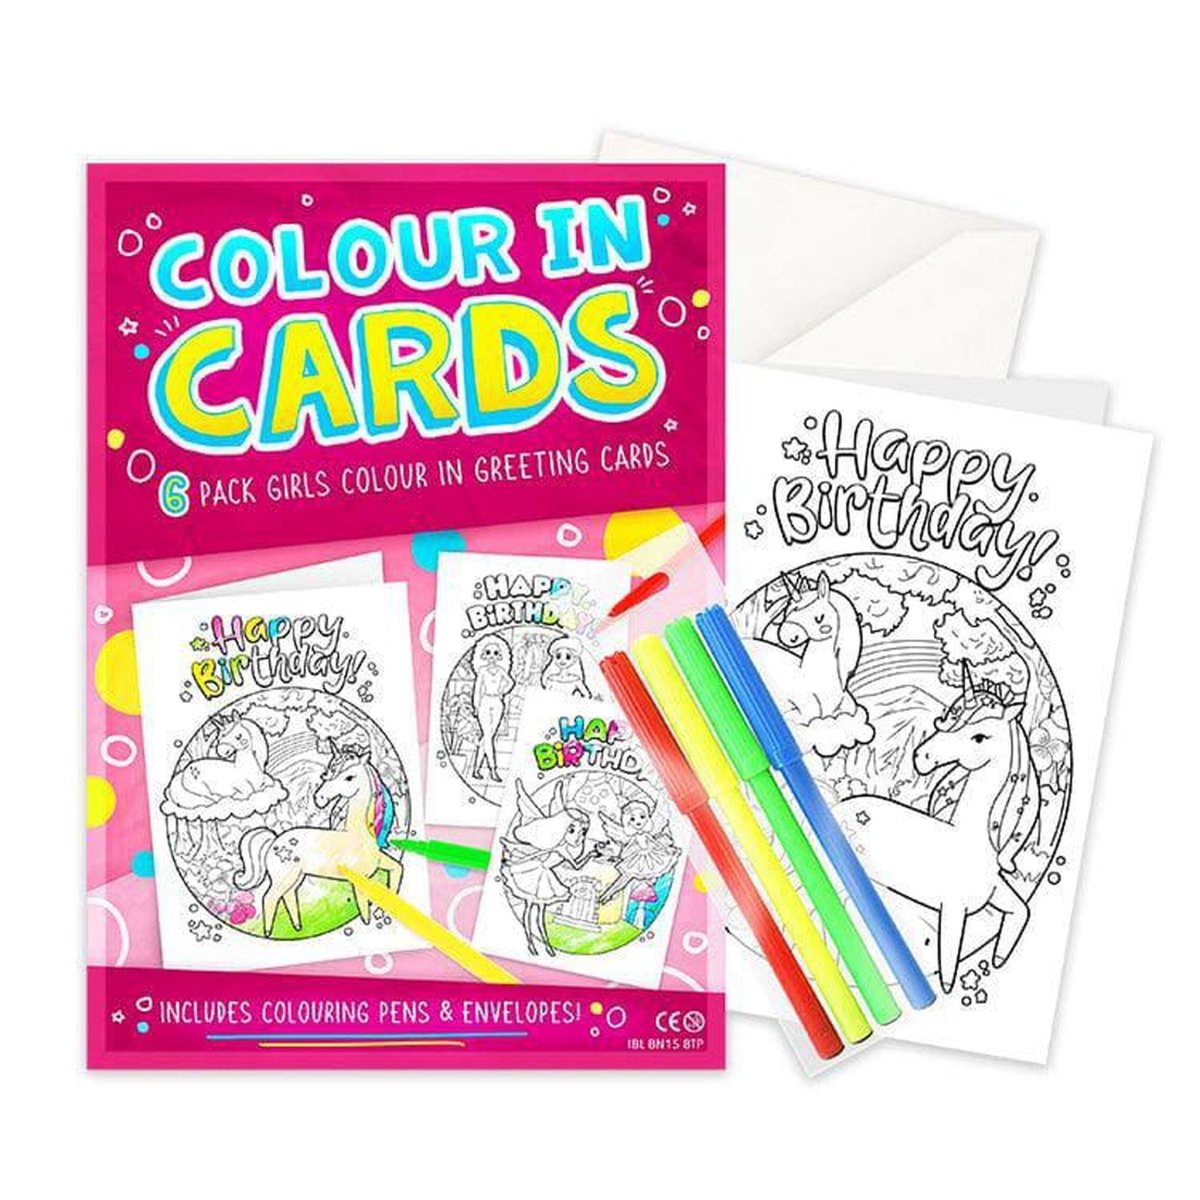 Girls Colour In Greetings Cards Bumper Pack - Kids Party Craft